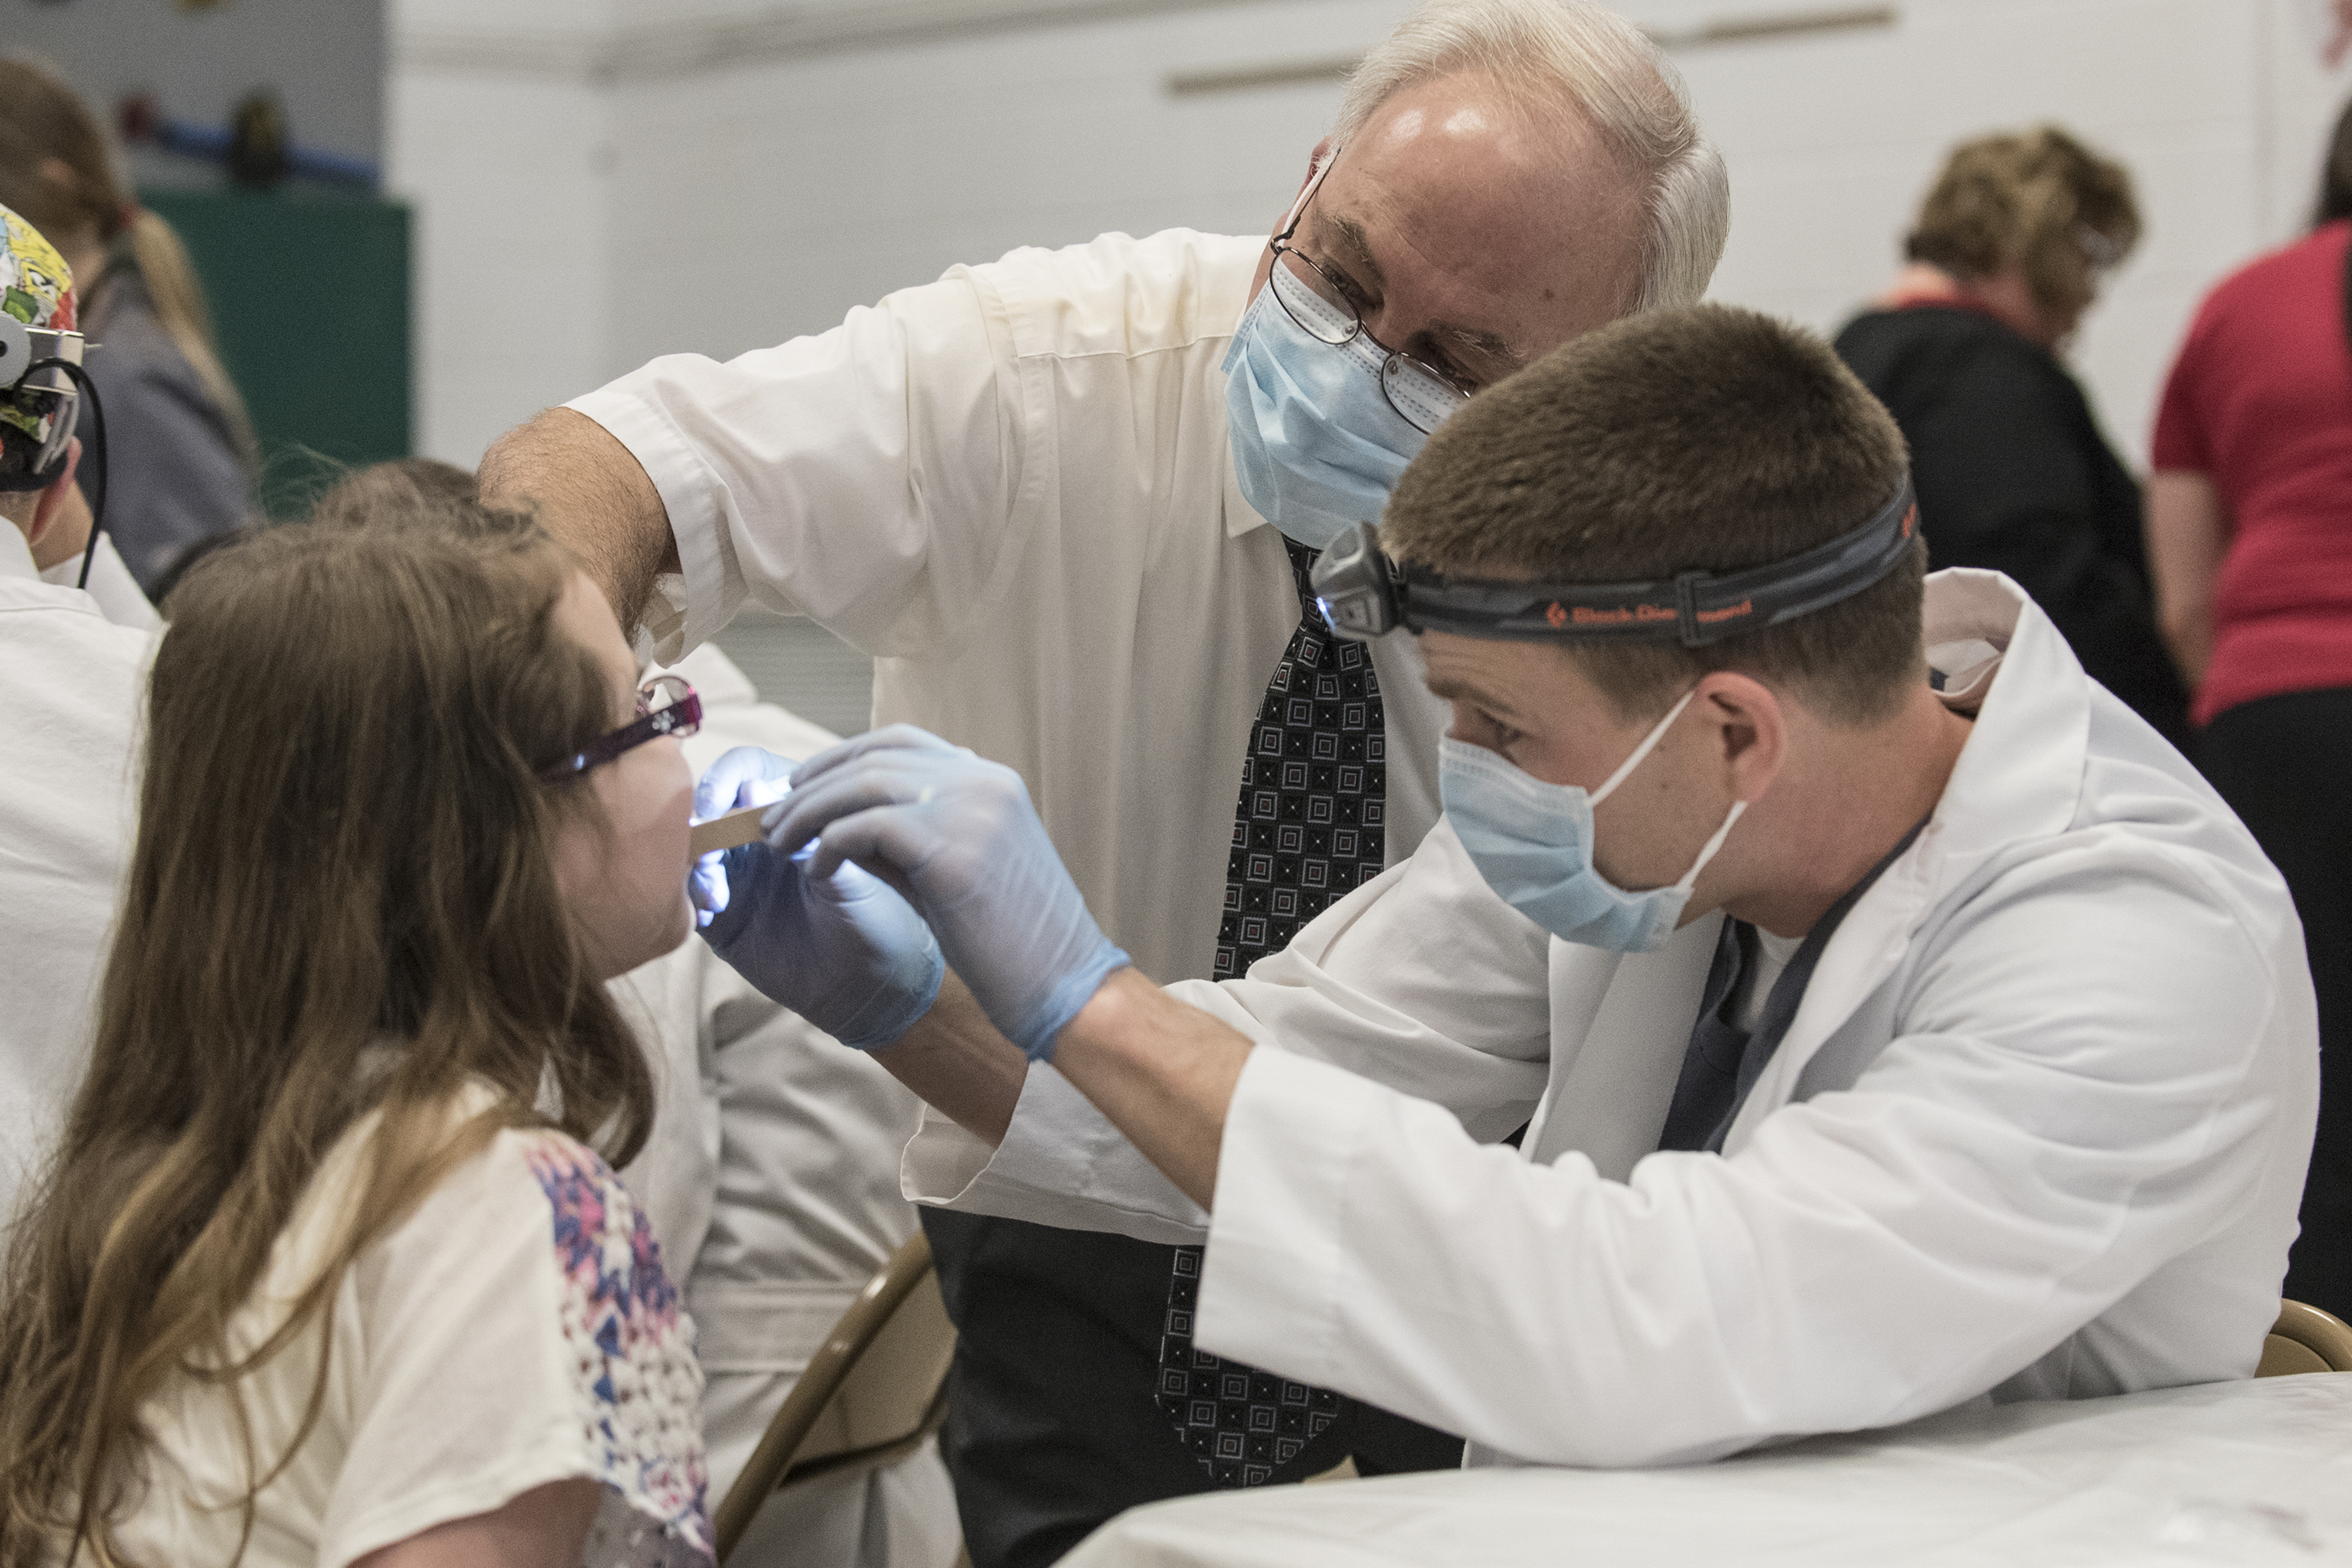 Smile Kentucky! and UofL help give kids new smiles